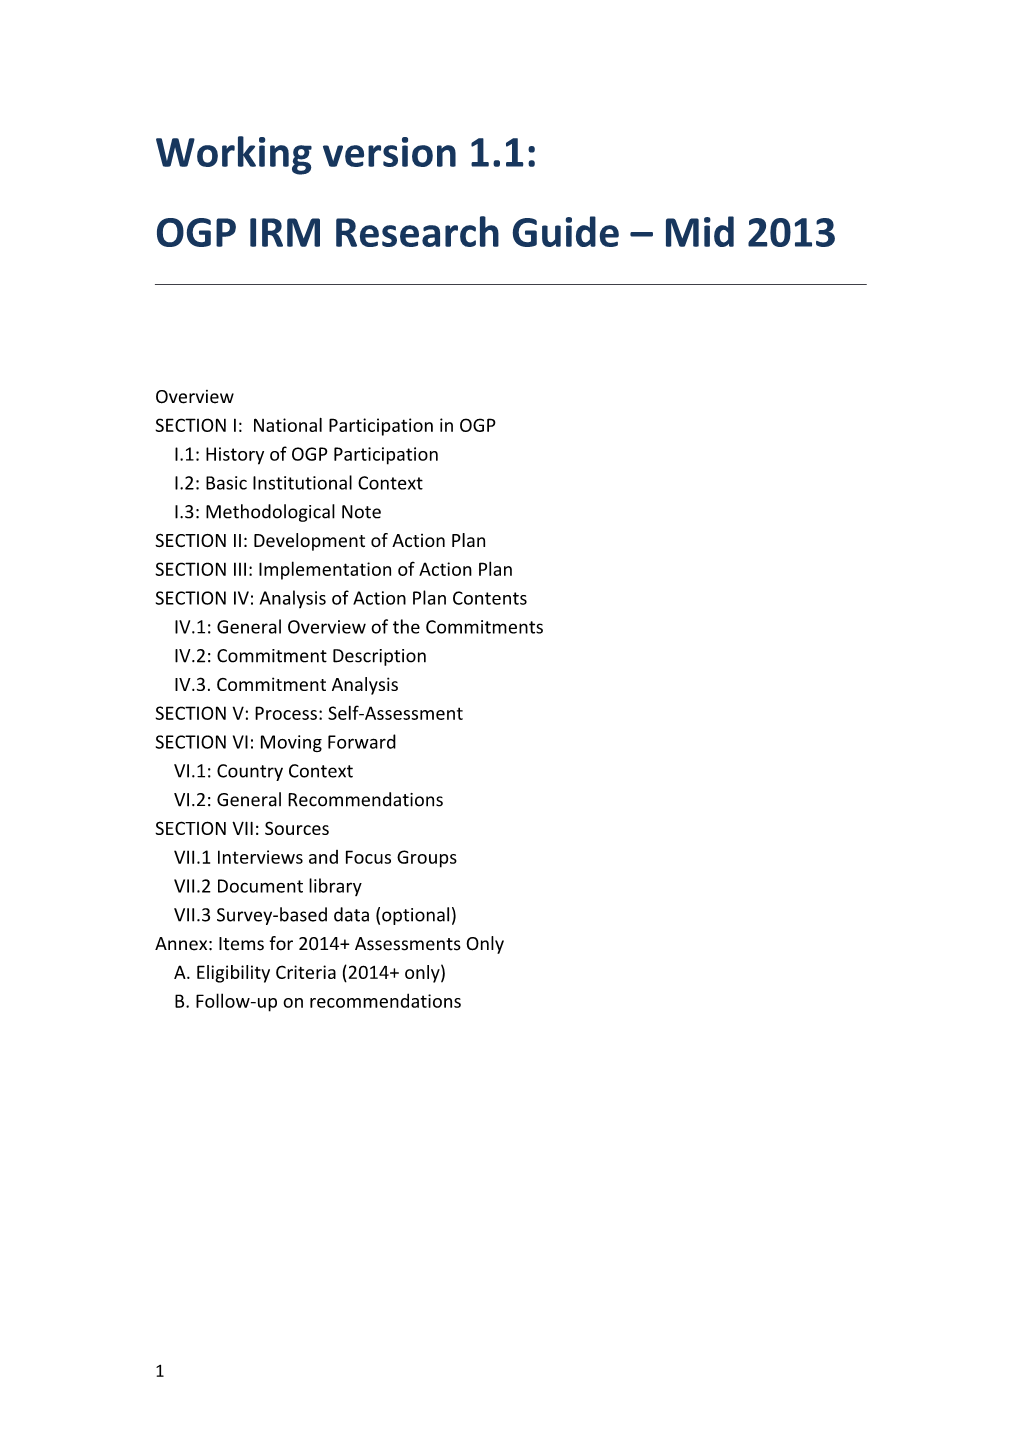 OGP IRM Research Guide Mid 2013